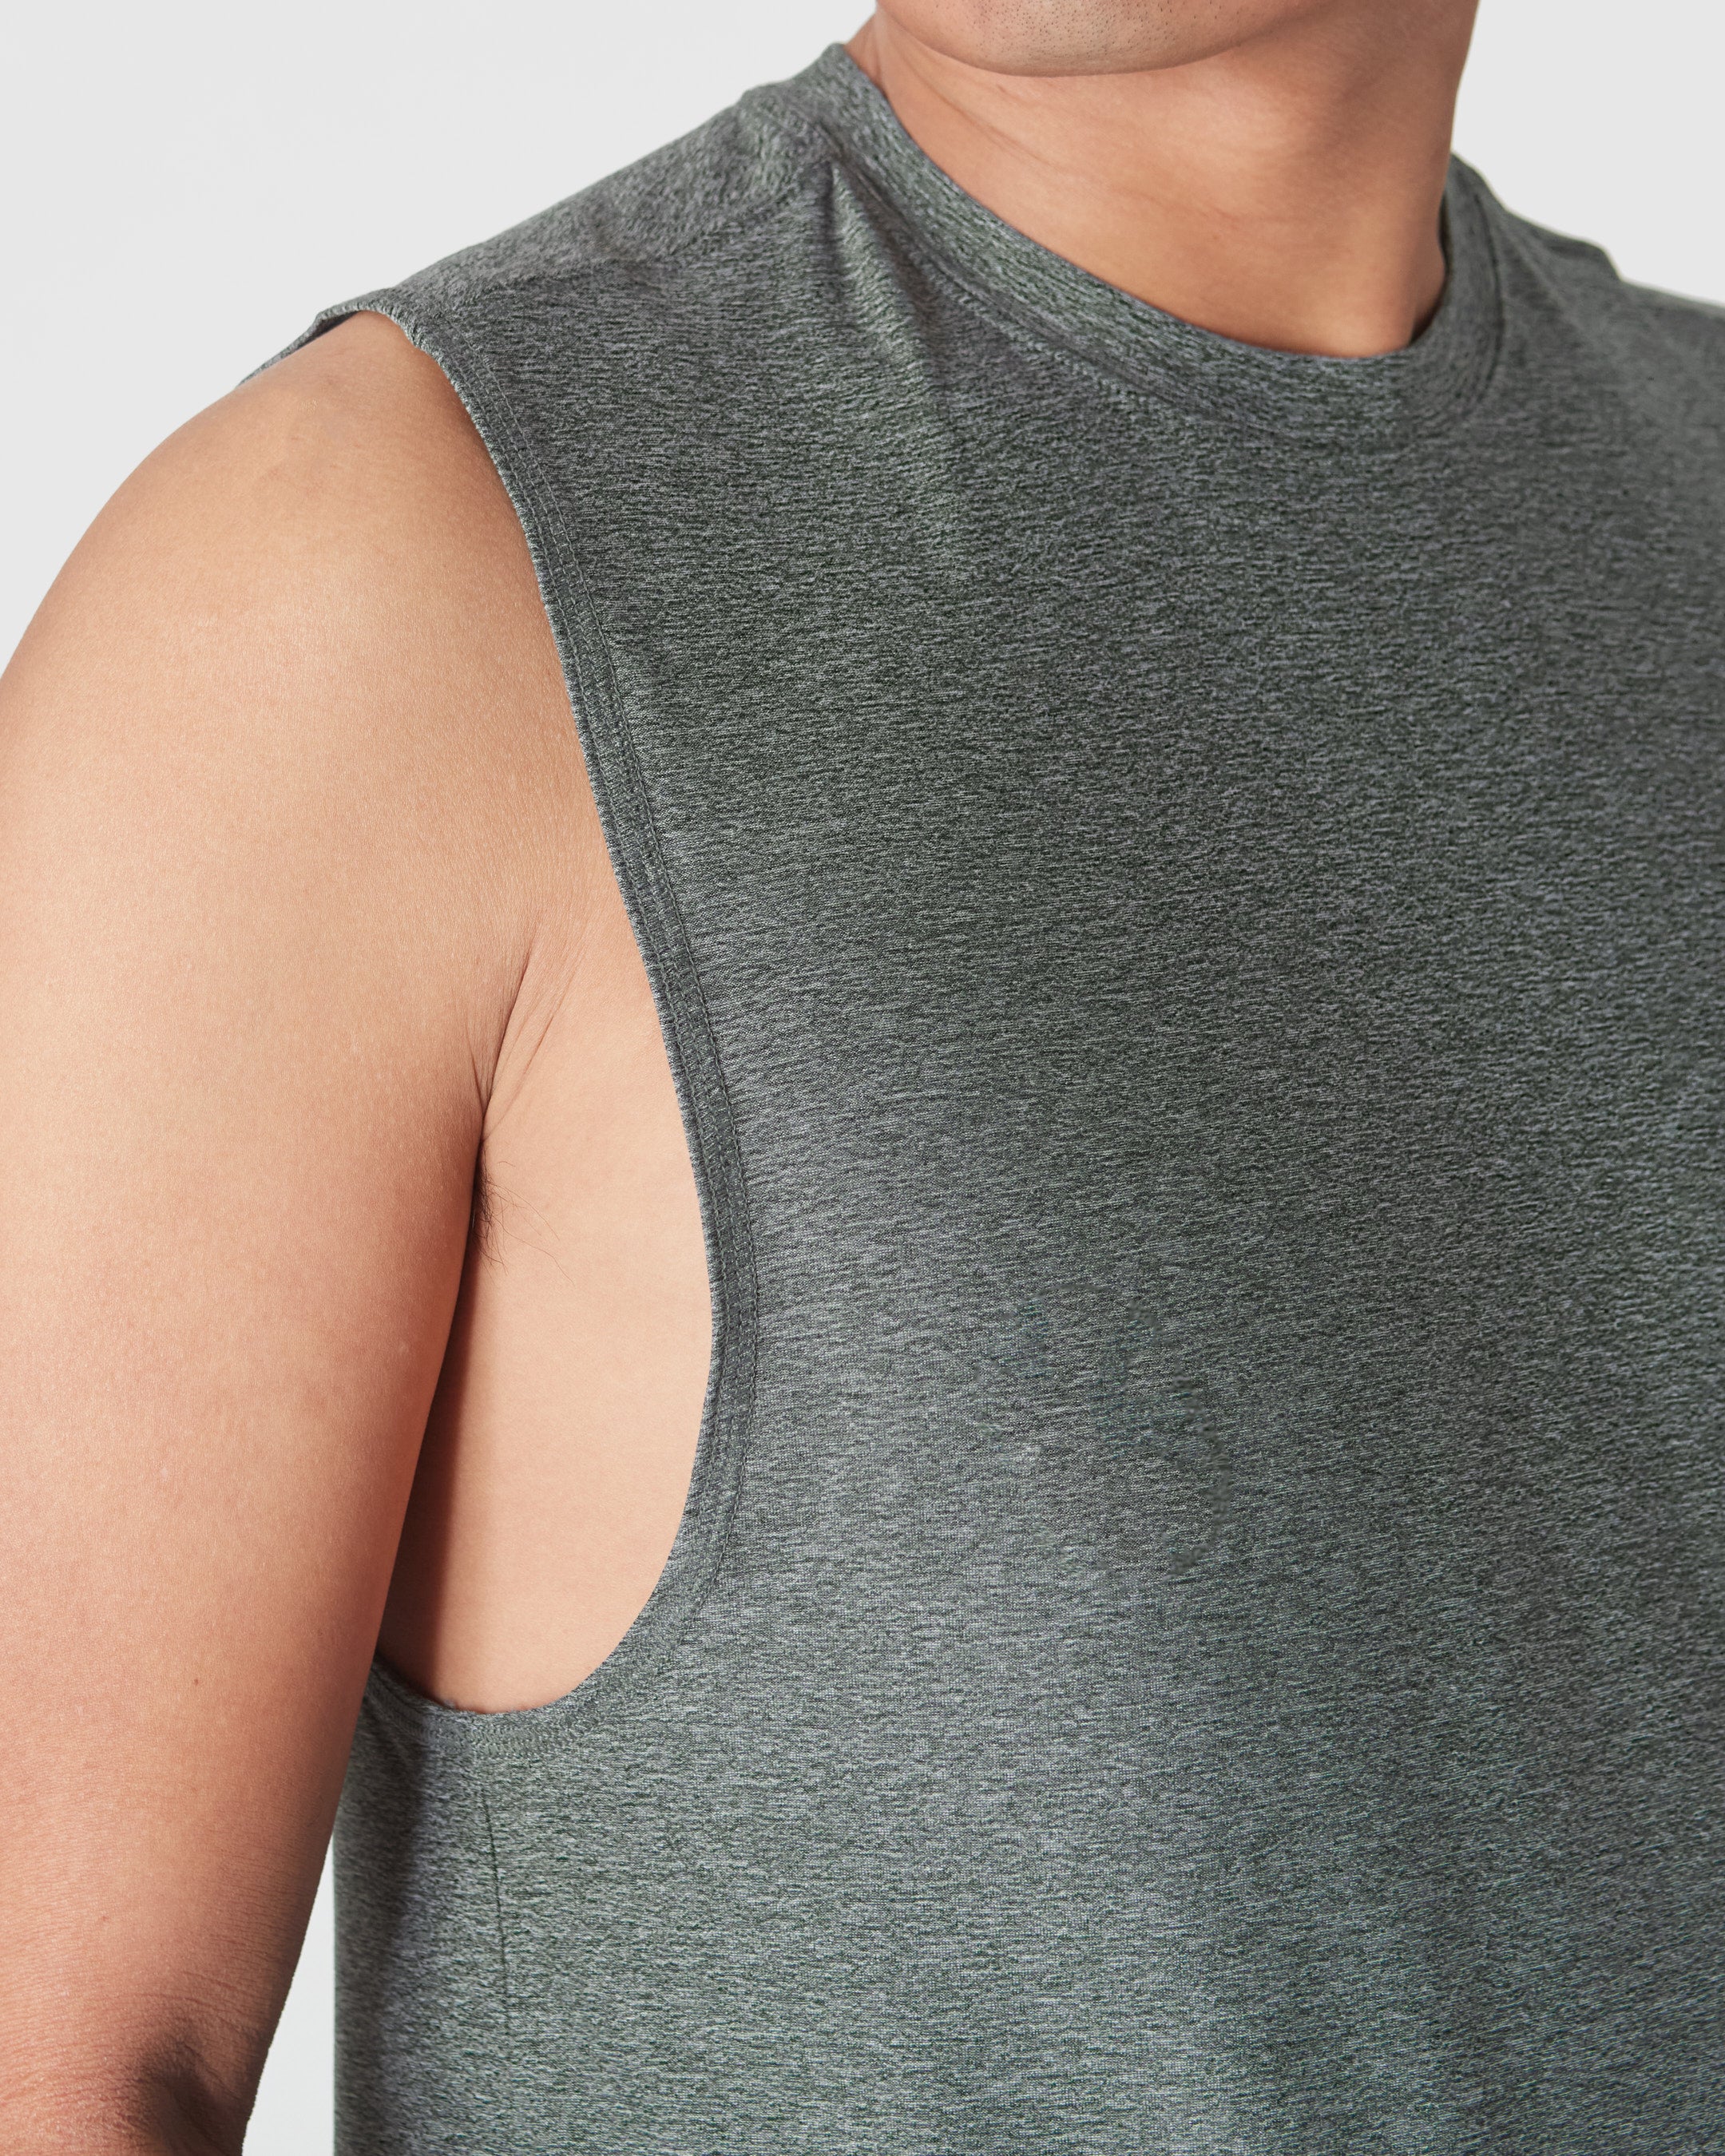 Heather Forest Sleeveless Active Muscle Tee